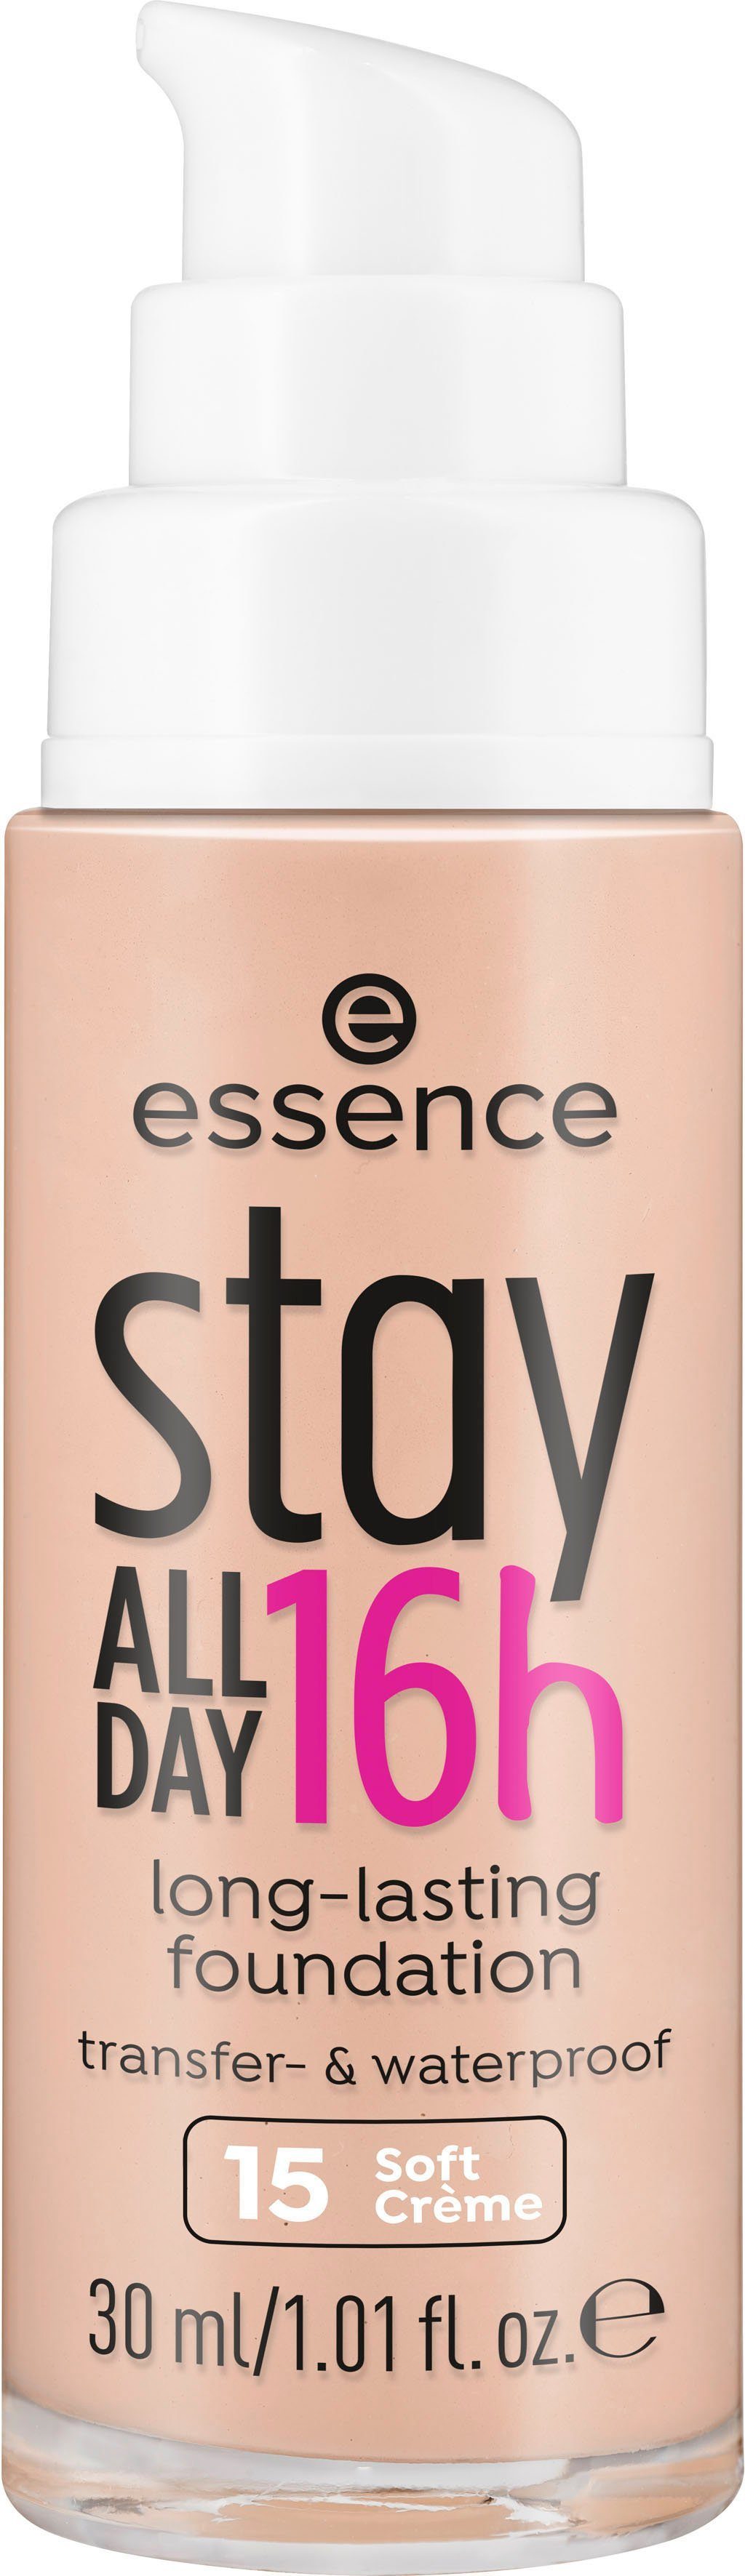 stay Soft DAY Essence long-lasting, Creme 16h ALL 3-tlg. Foundation